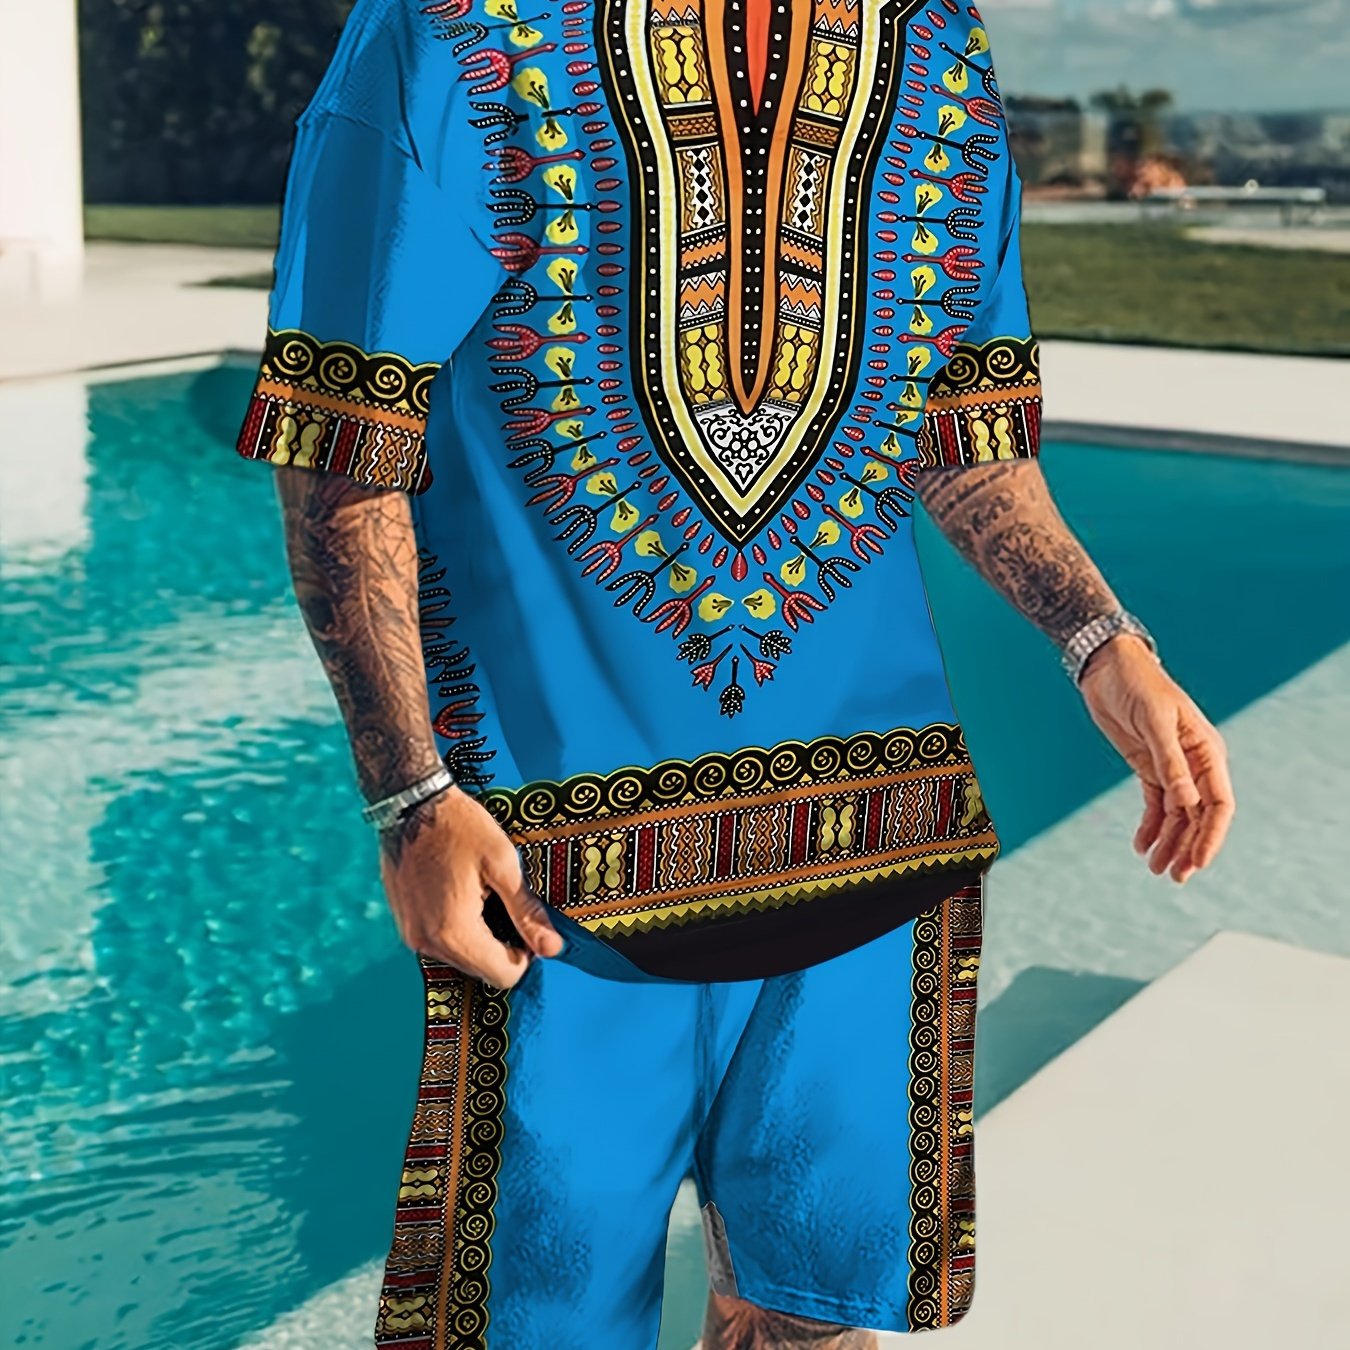 

2-piece Men's Vibrant Ethnic Print Shirt & Shorts Set - Casual Summer Holiday Comfort Fit Outfit